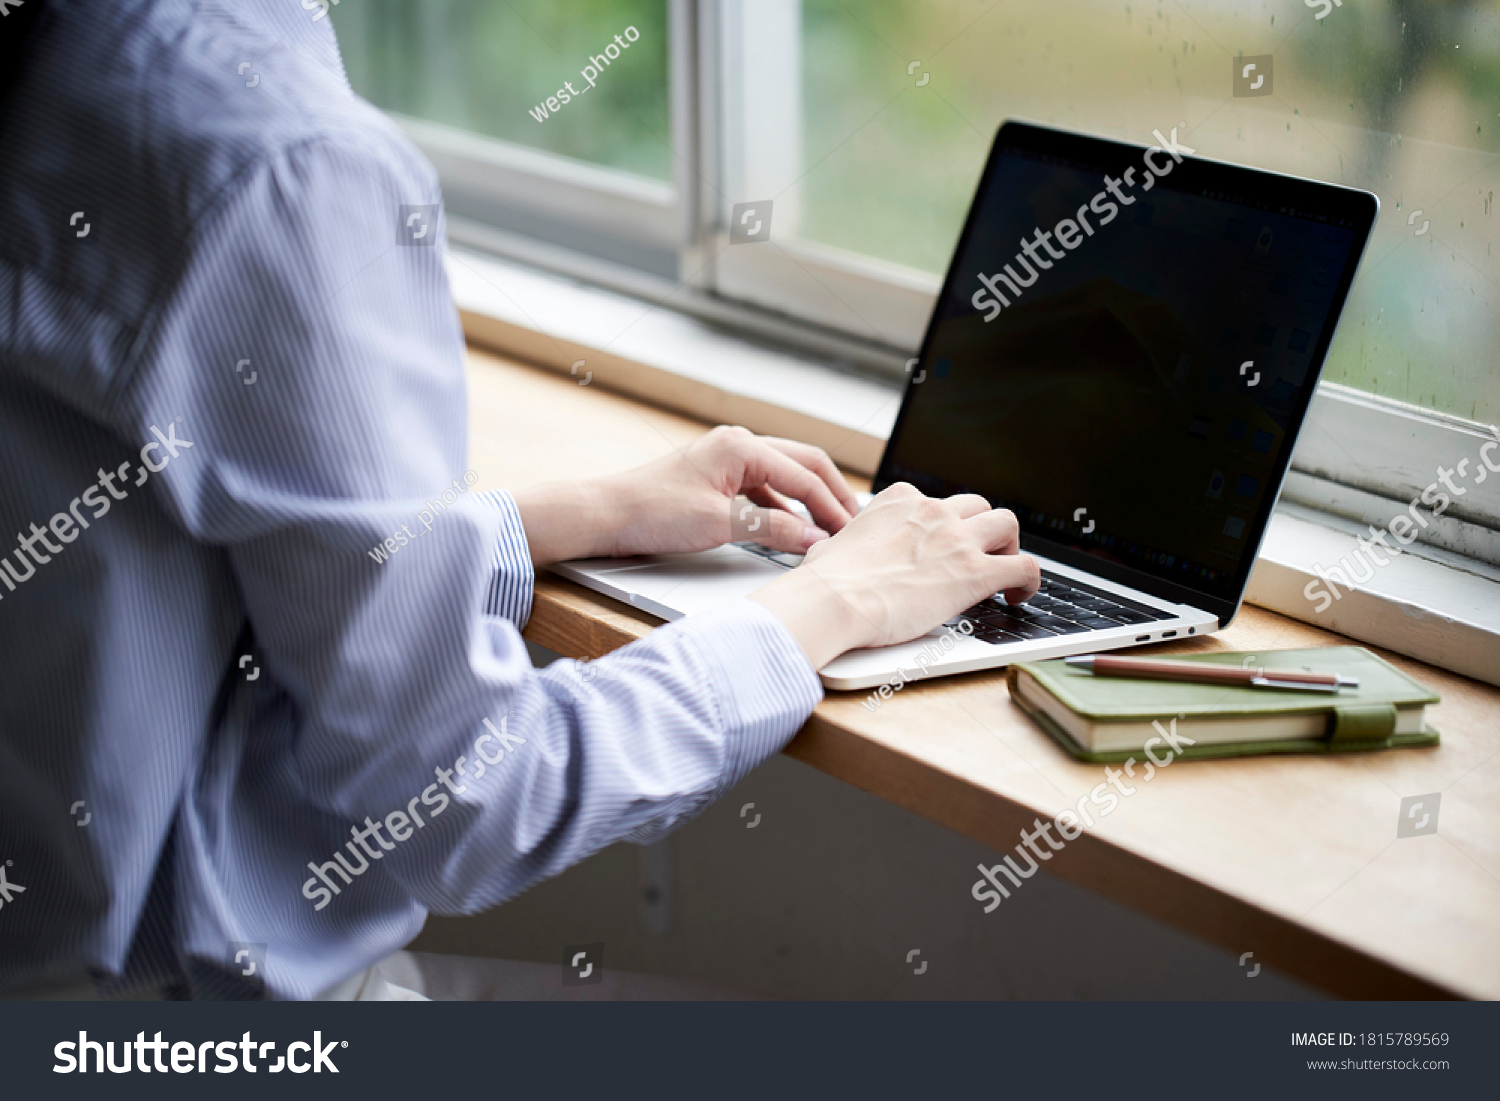 A young woman operating a computer by the window #1815789569